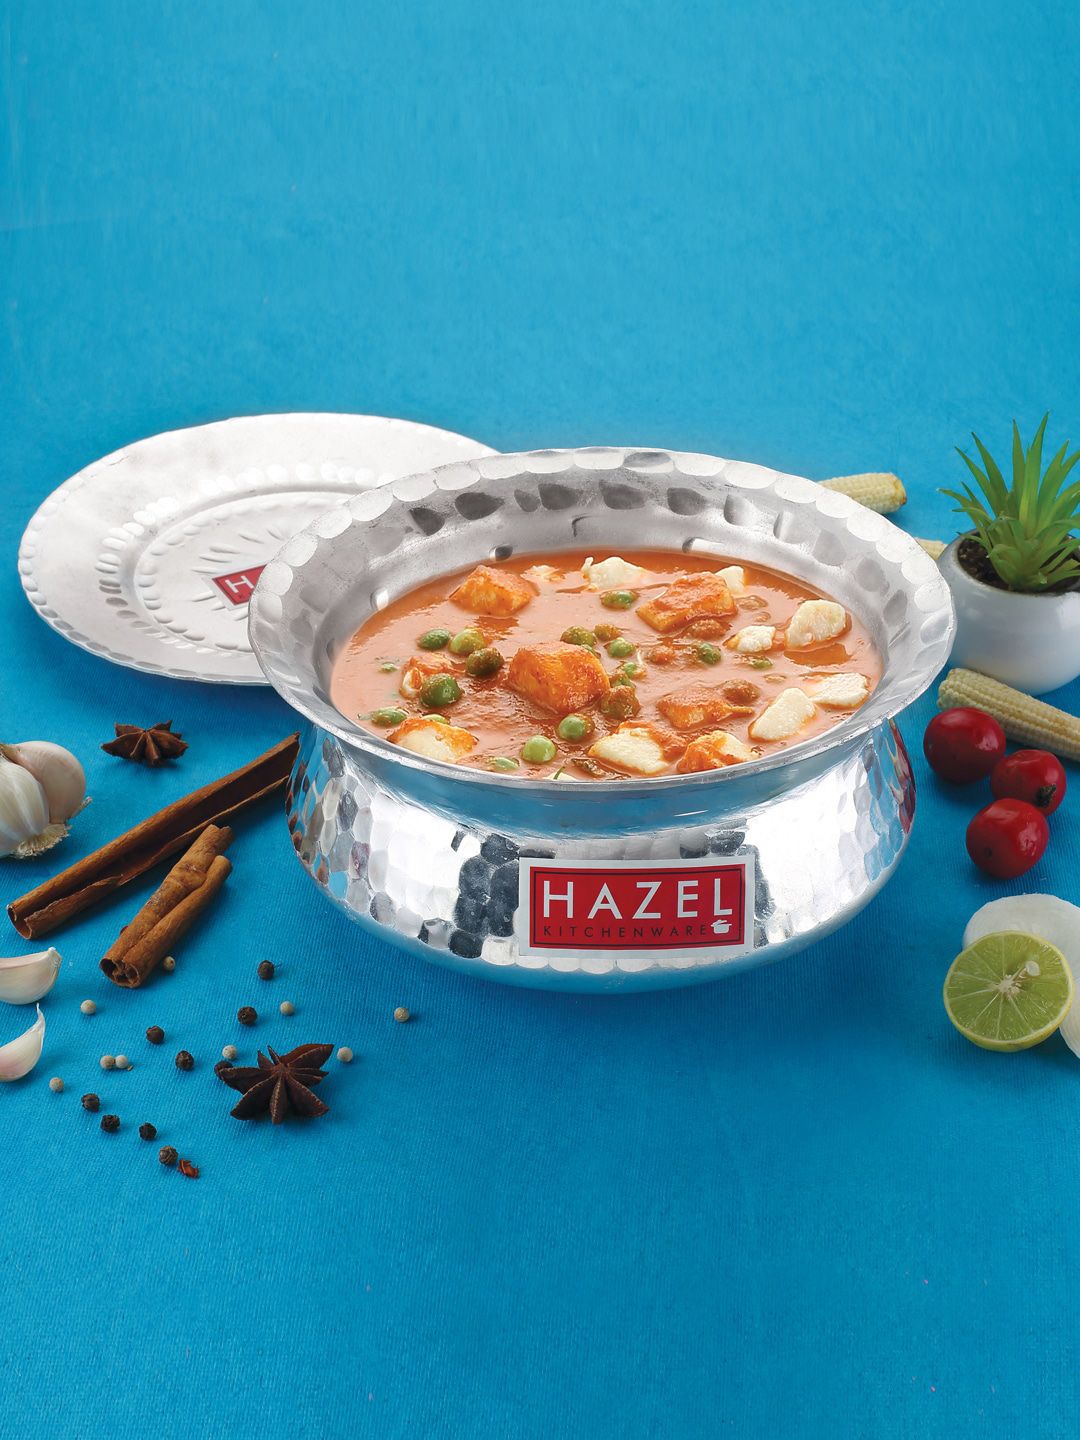 HAZEL Silver-Toned Textured Handi With Lid Price in India